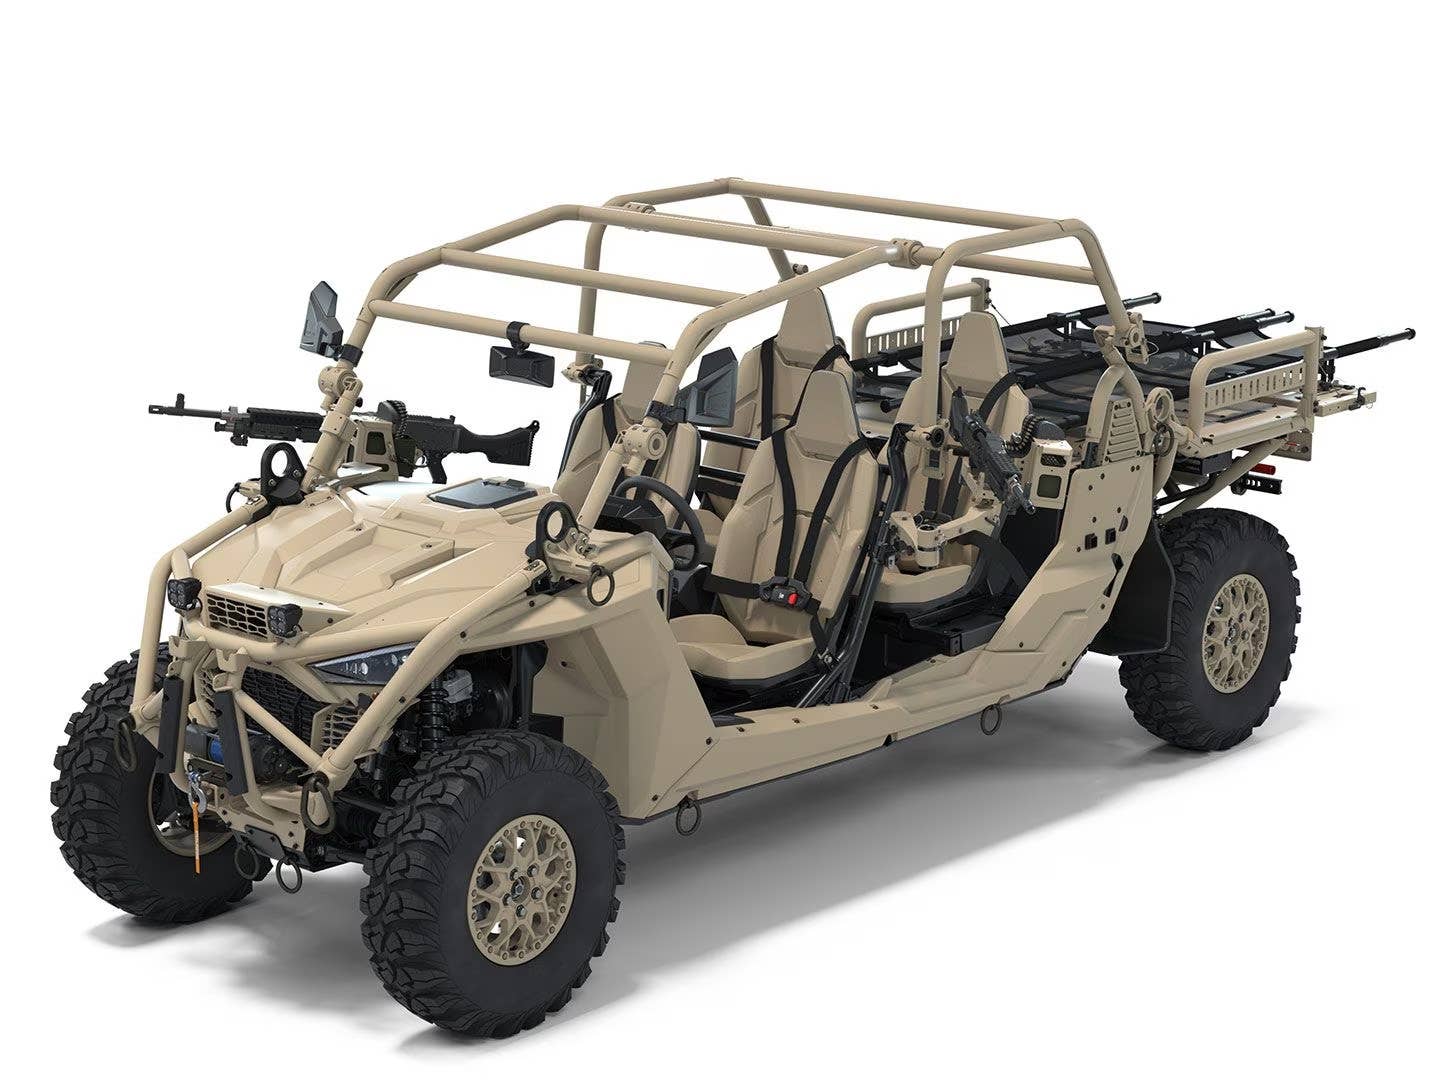 A rendering of an MRZR with a 7.62x51mm M240B machine gun on a swing arm mount for use by the front passenger. <em>Polaris</em>